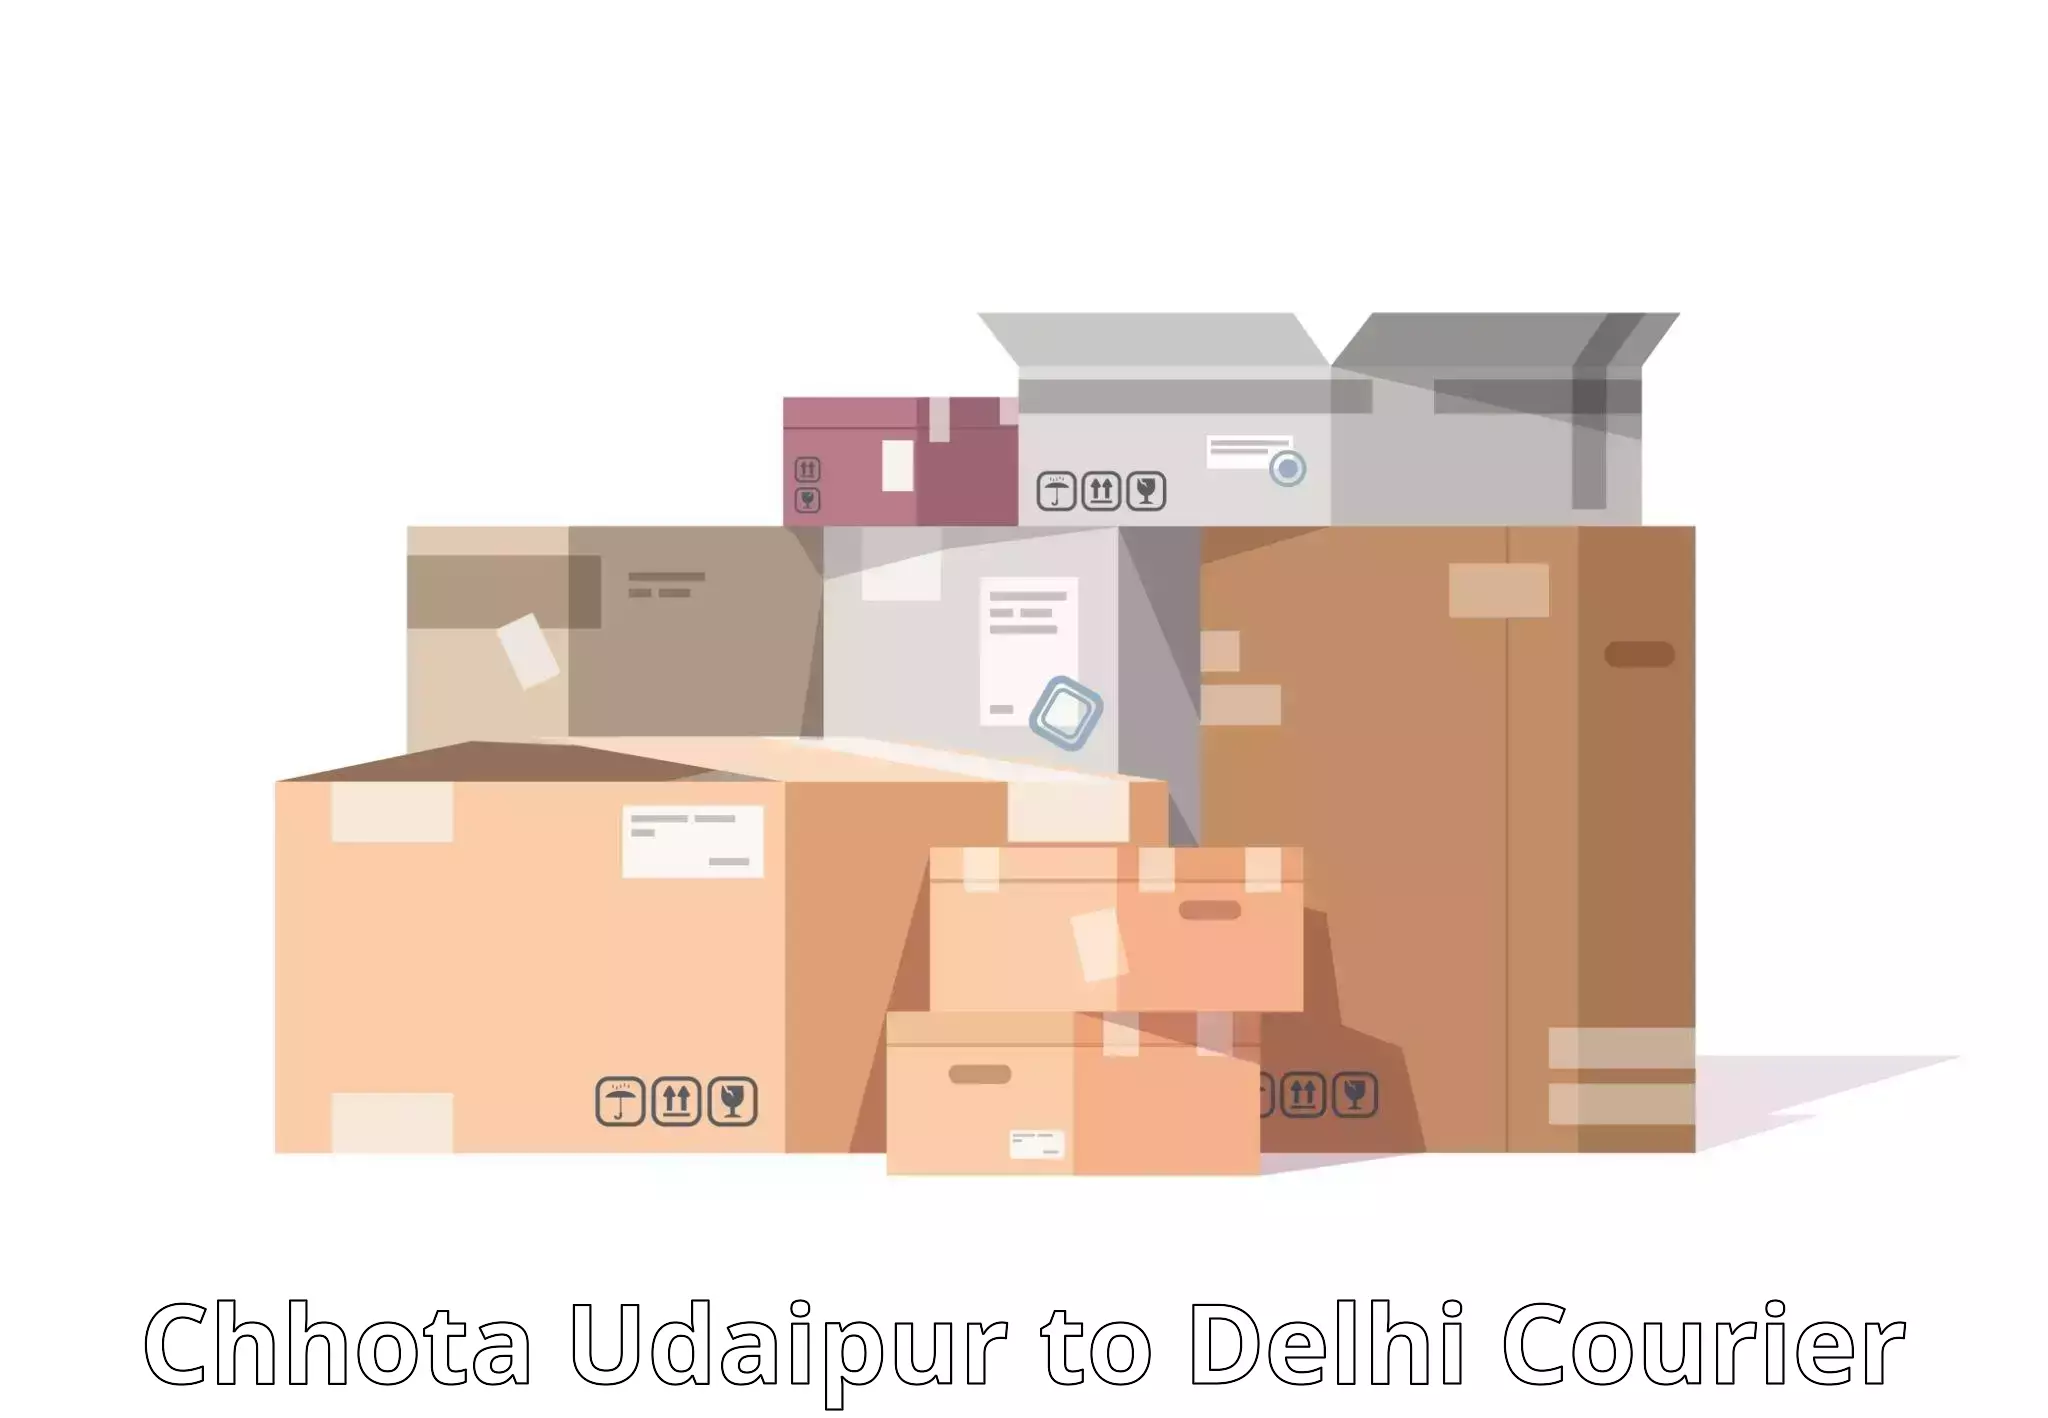 Large package courier Chhota Udaipur to NCR